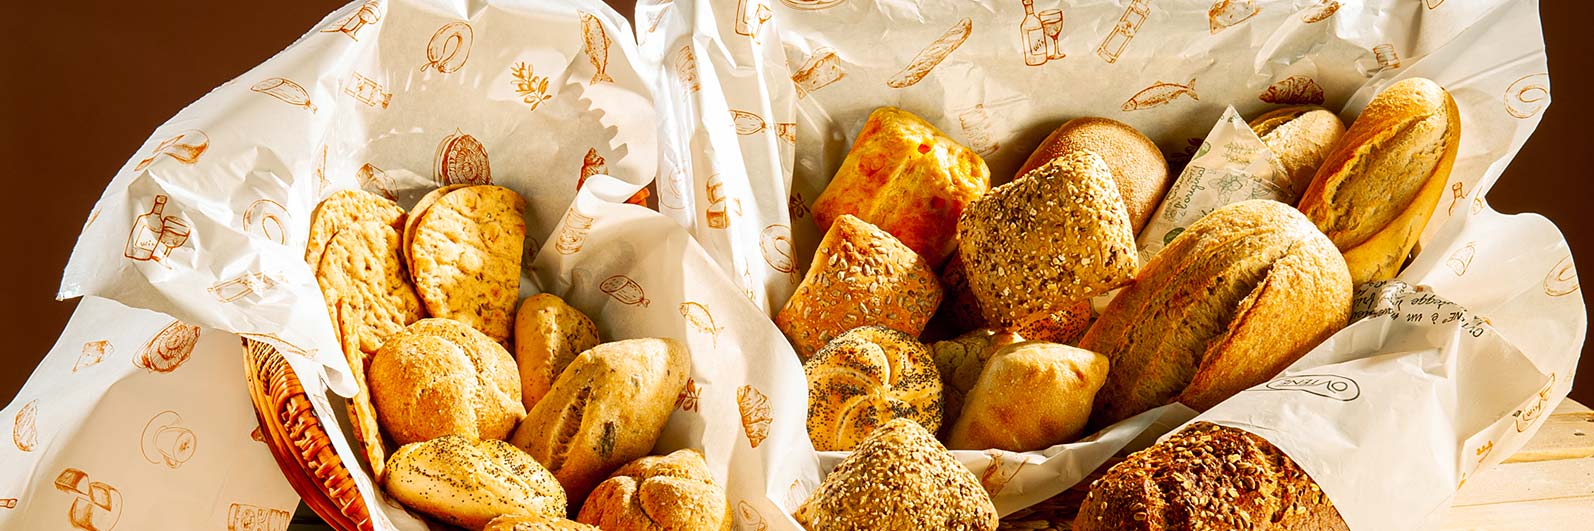 UK Suppliers of Personalized Bakery Packaging Solutions